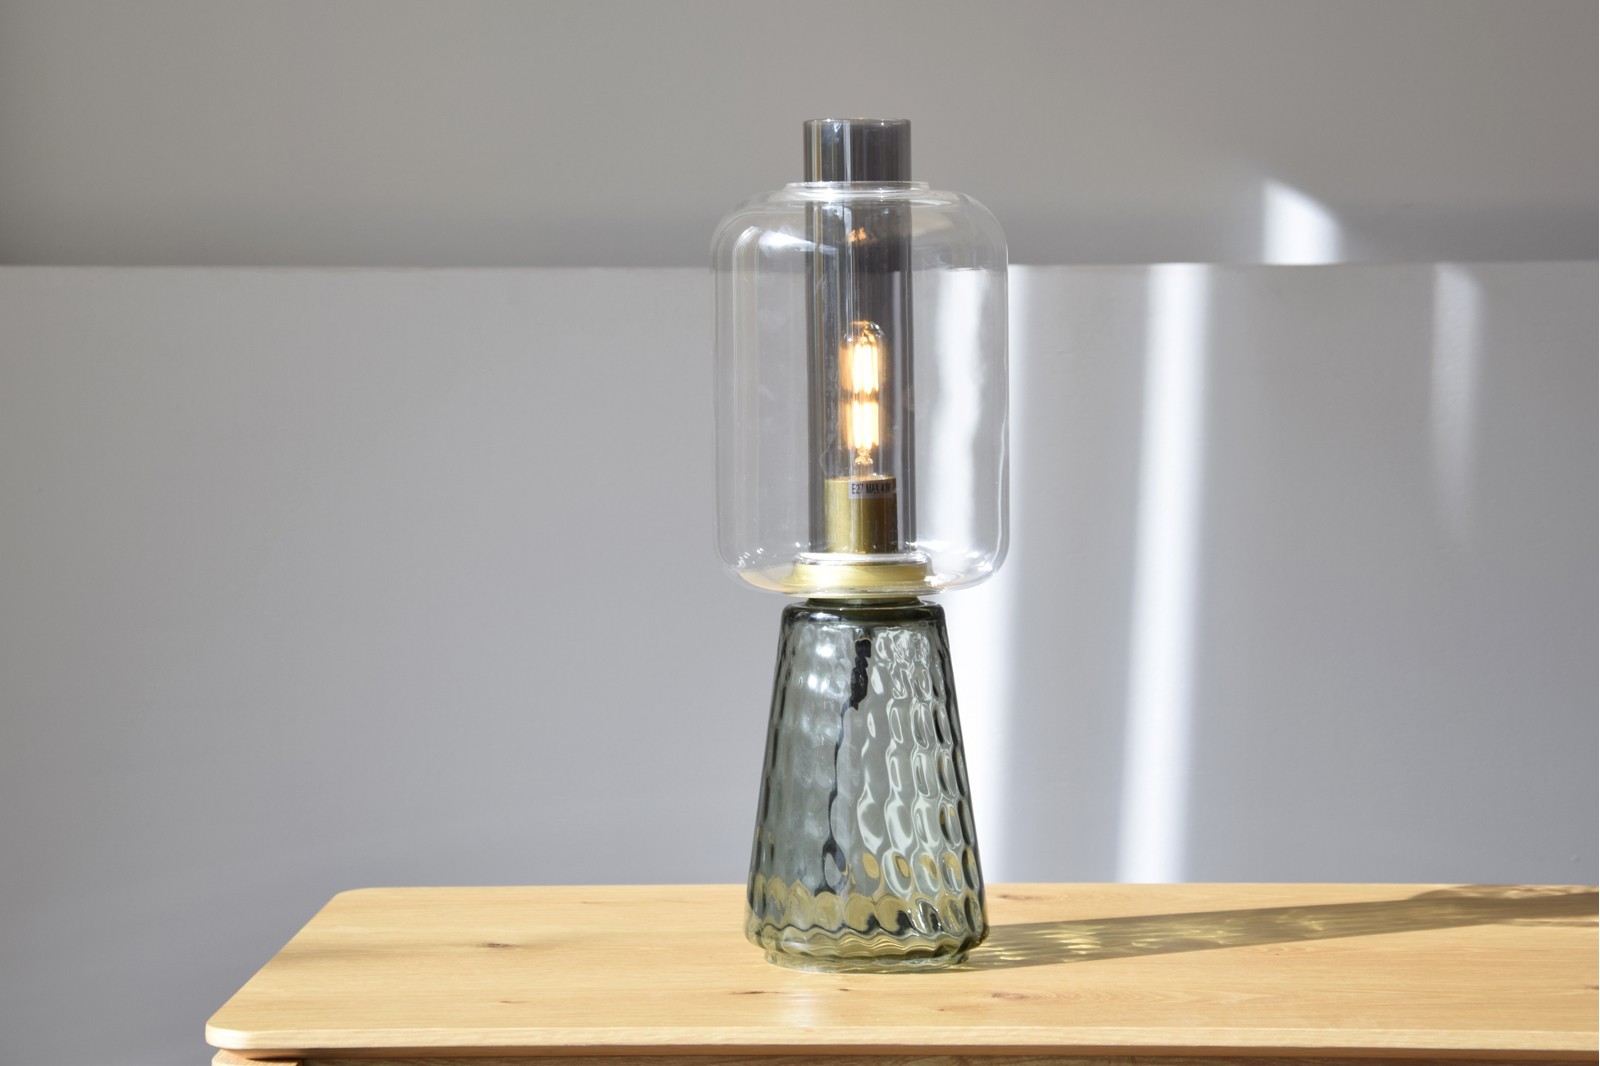 TABLE LAMP COLLECTION CANDIL. SMOKY GLASS. LED